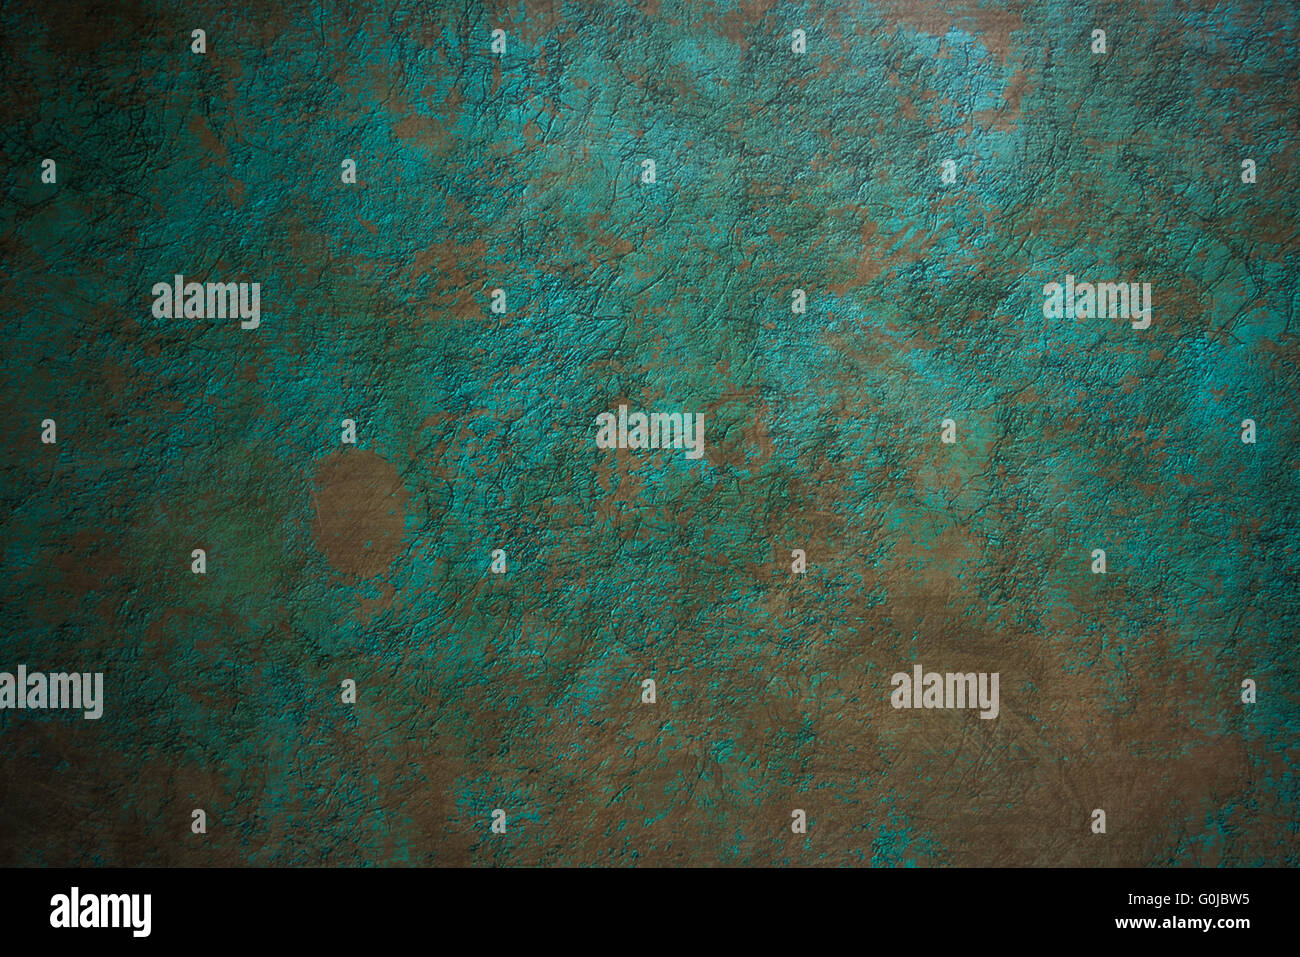 Grungy slate or stone background, or backdrop with vignette Stock Photo